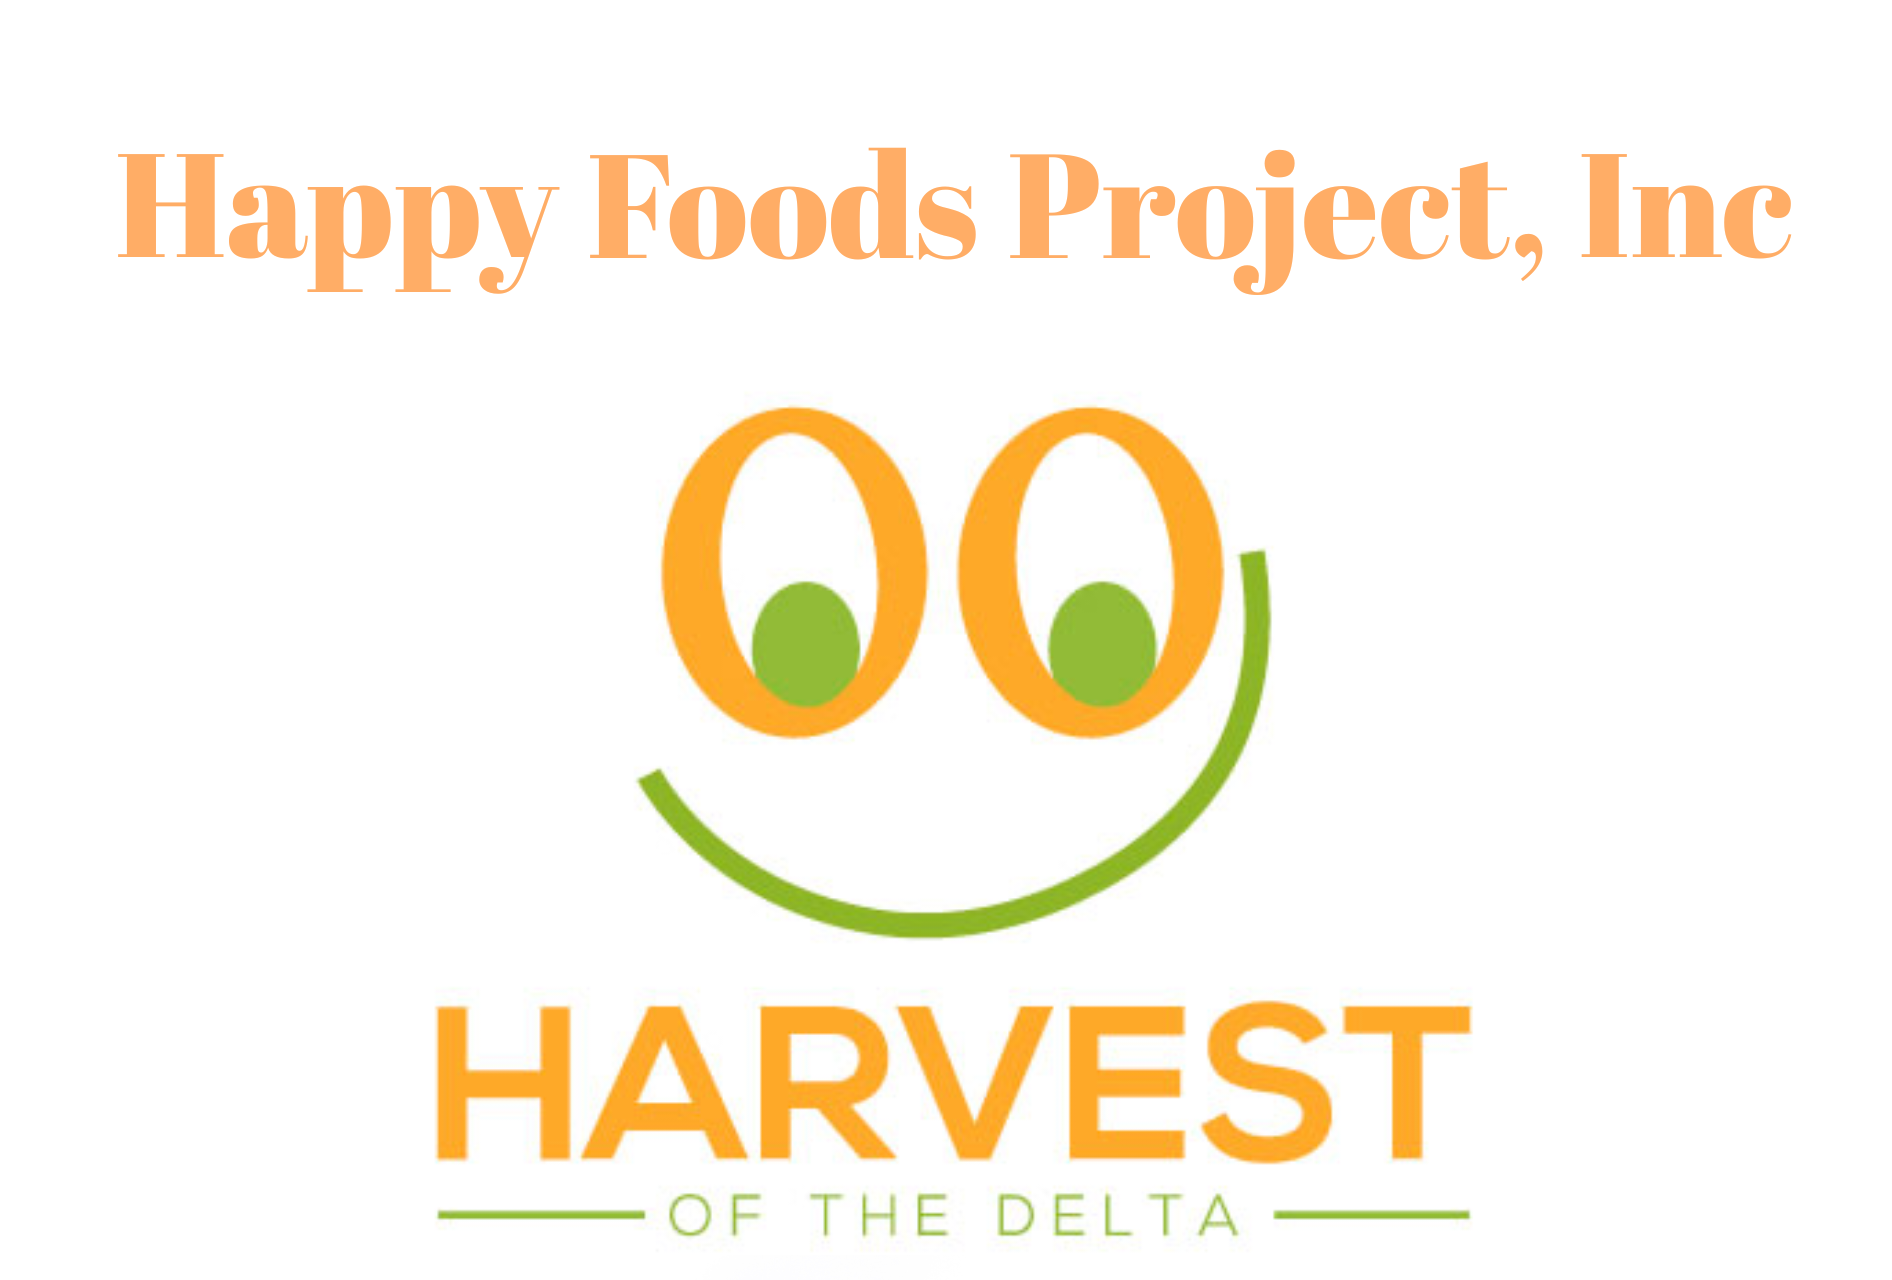 Logo for the Happy Foods Project